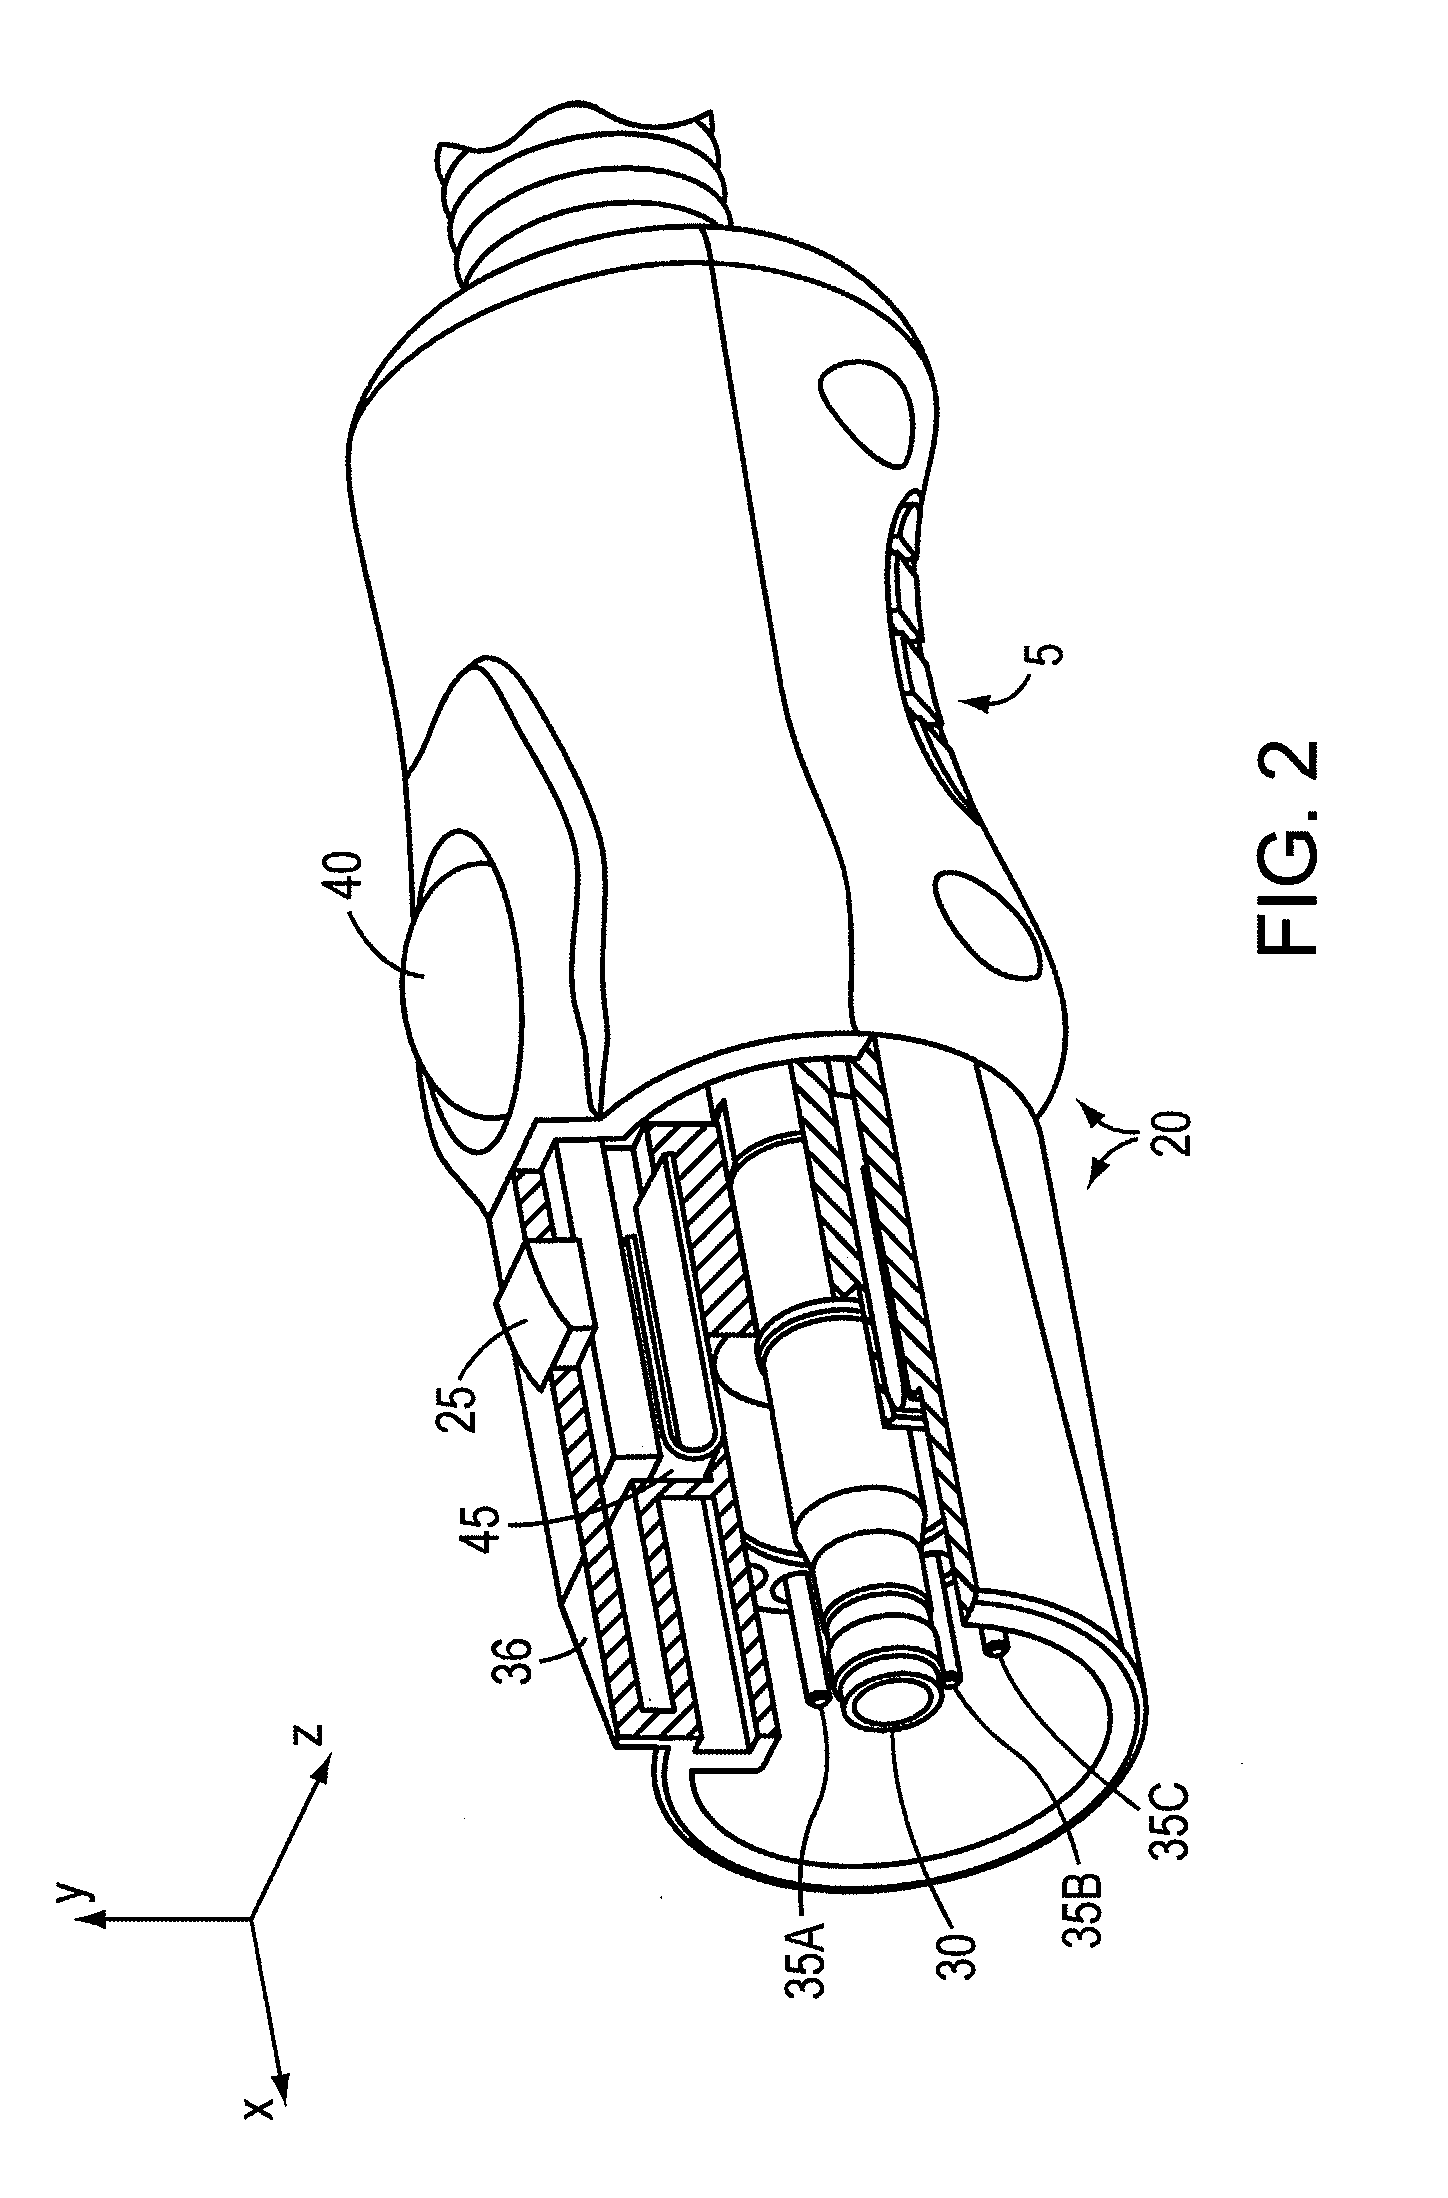 Connector for a Thermal Cutting System or Welding System